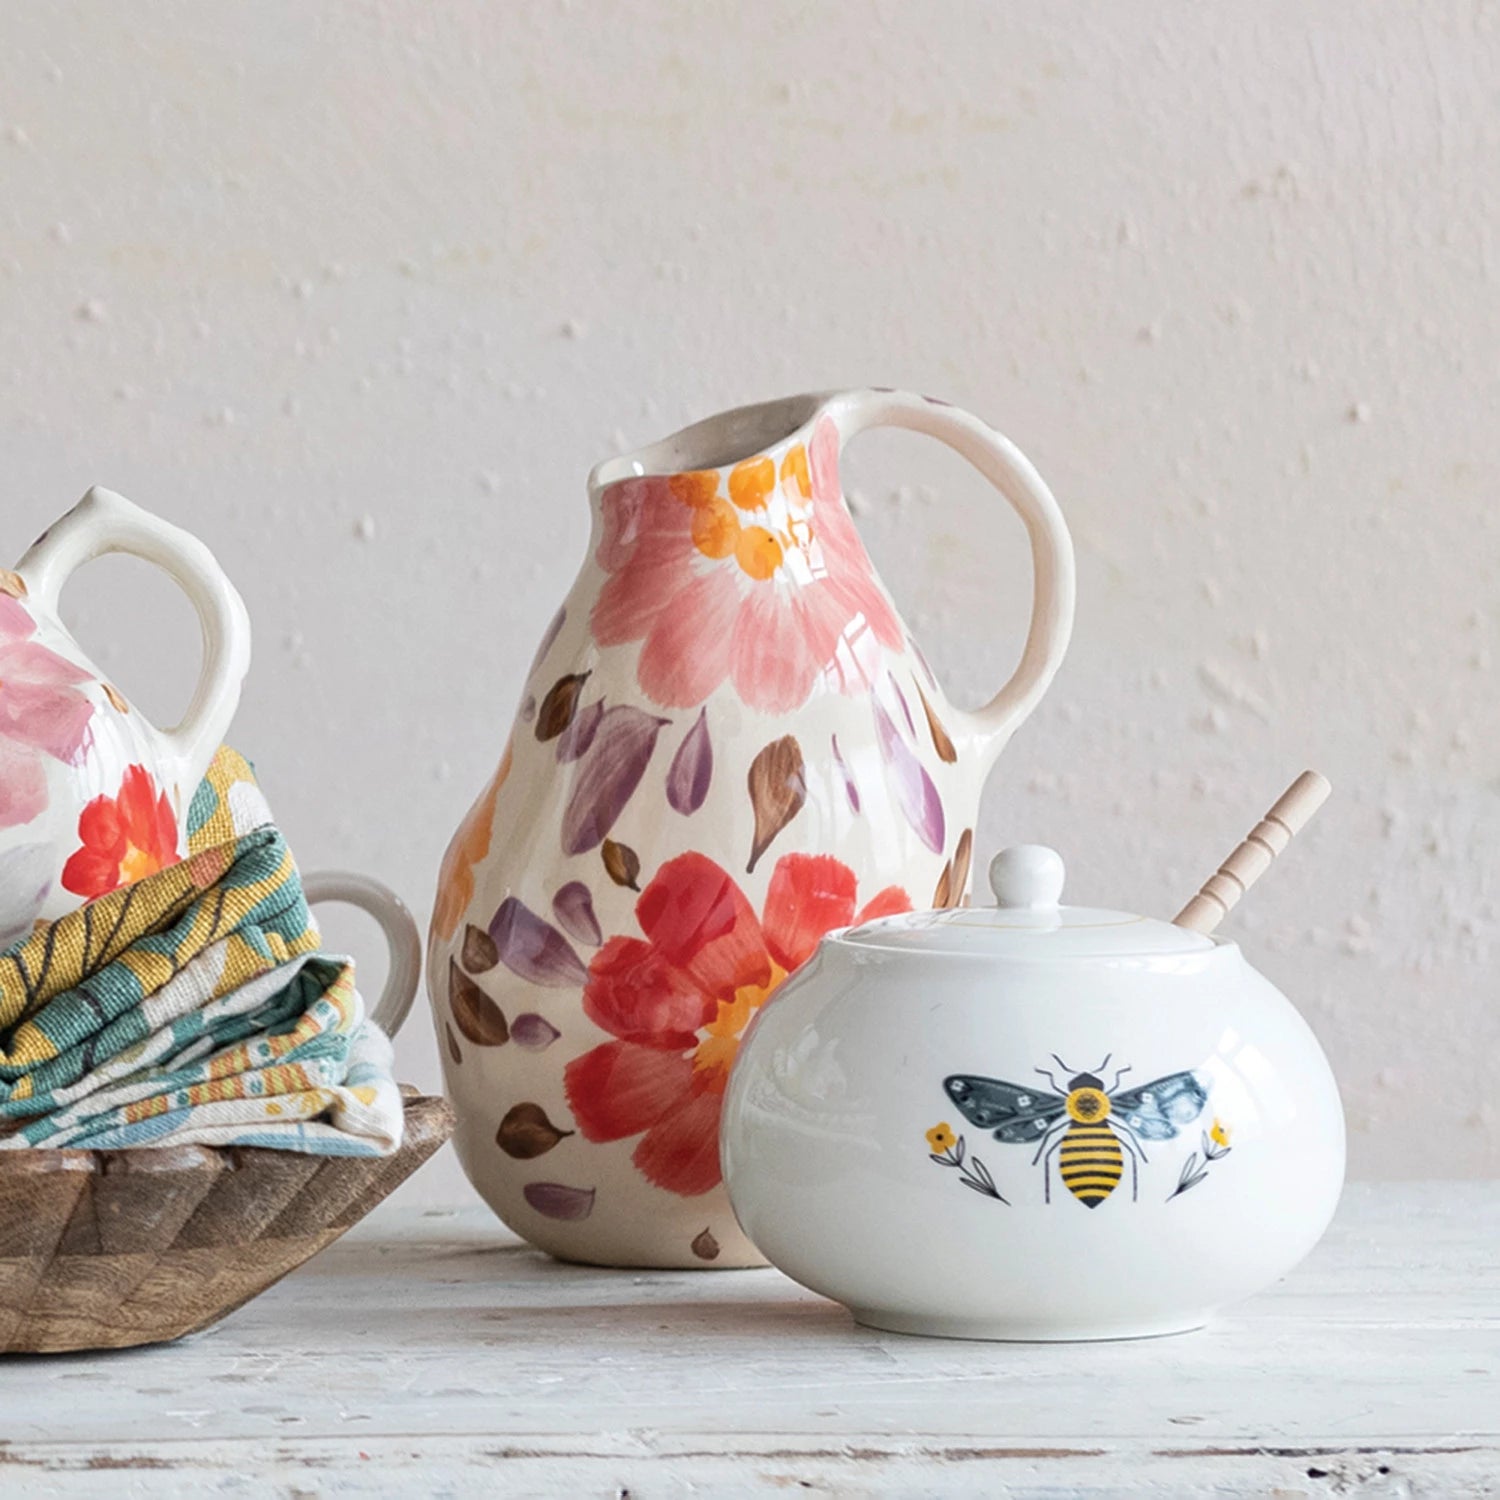 Creative Co-op - Hand-Painted Floral Stoneware Pitcher